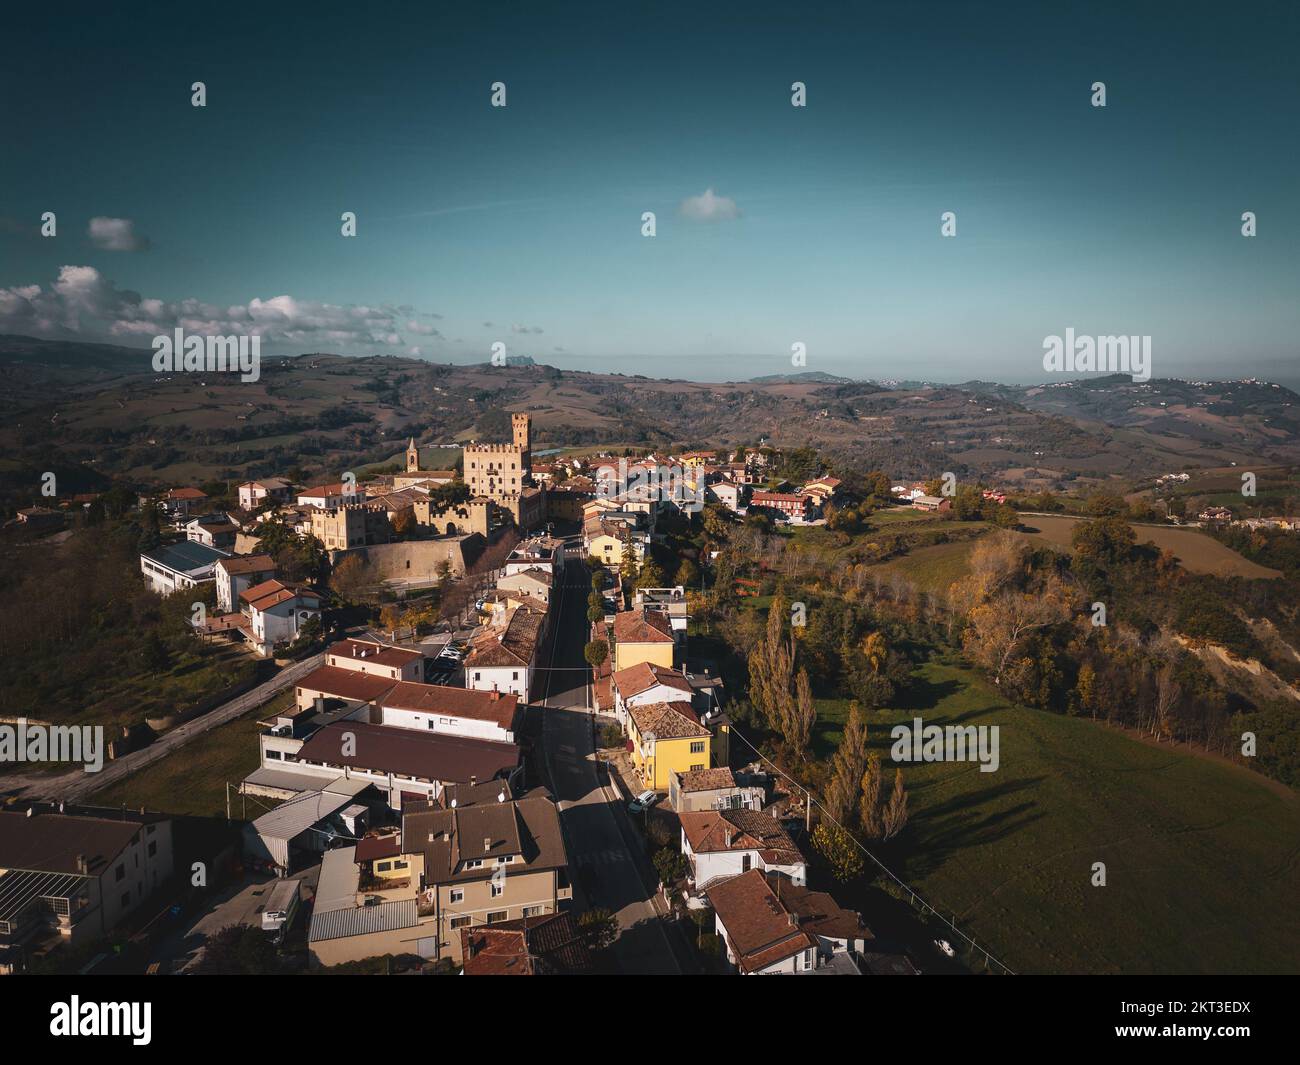 Italy, November 26, 2022: aerial view of the medieval village of Tavoleto in the province of Pesaro and Urbino in the Marche region Stock Photo